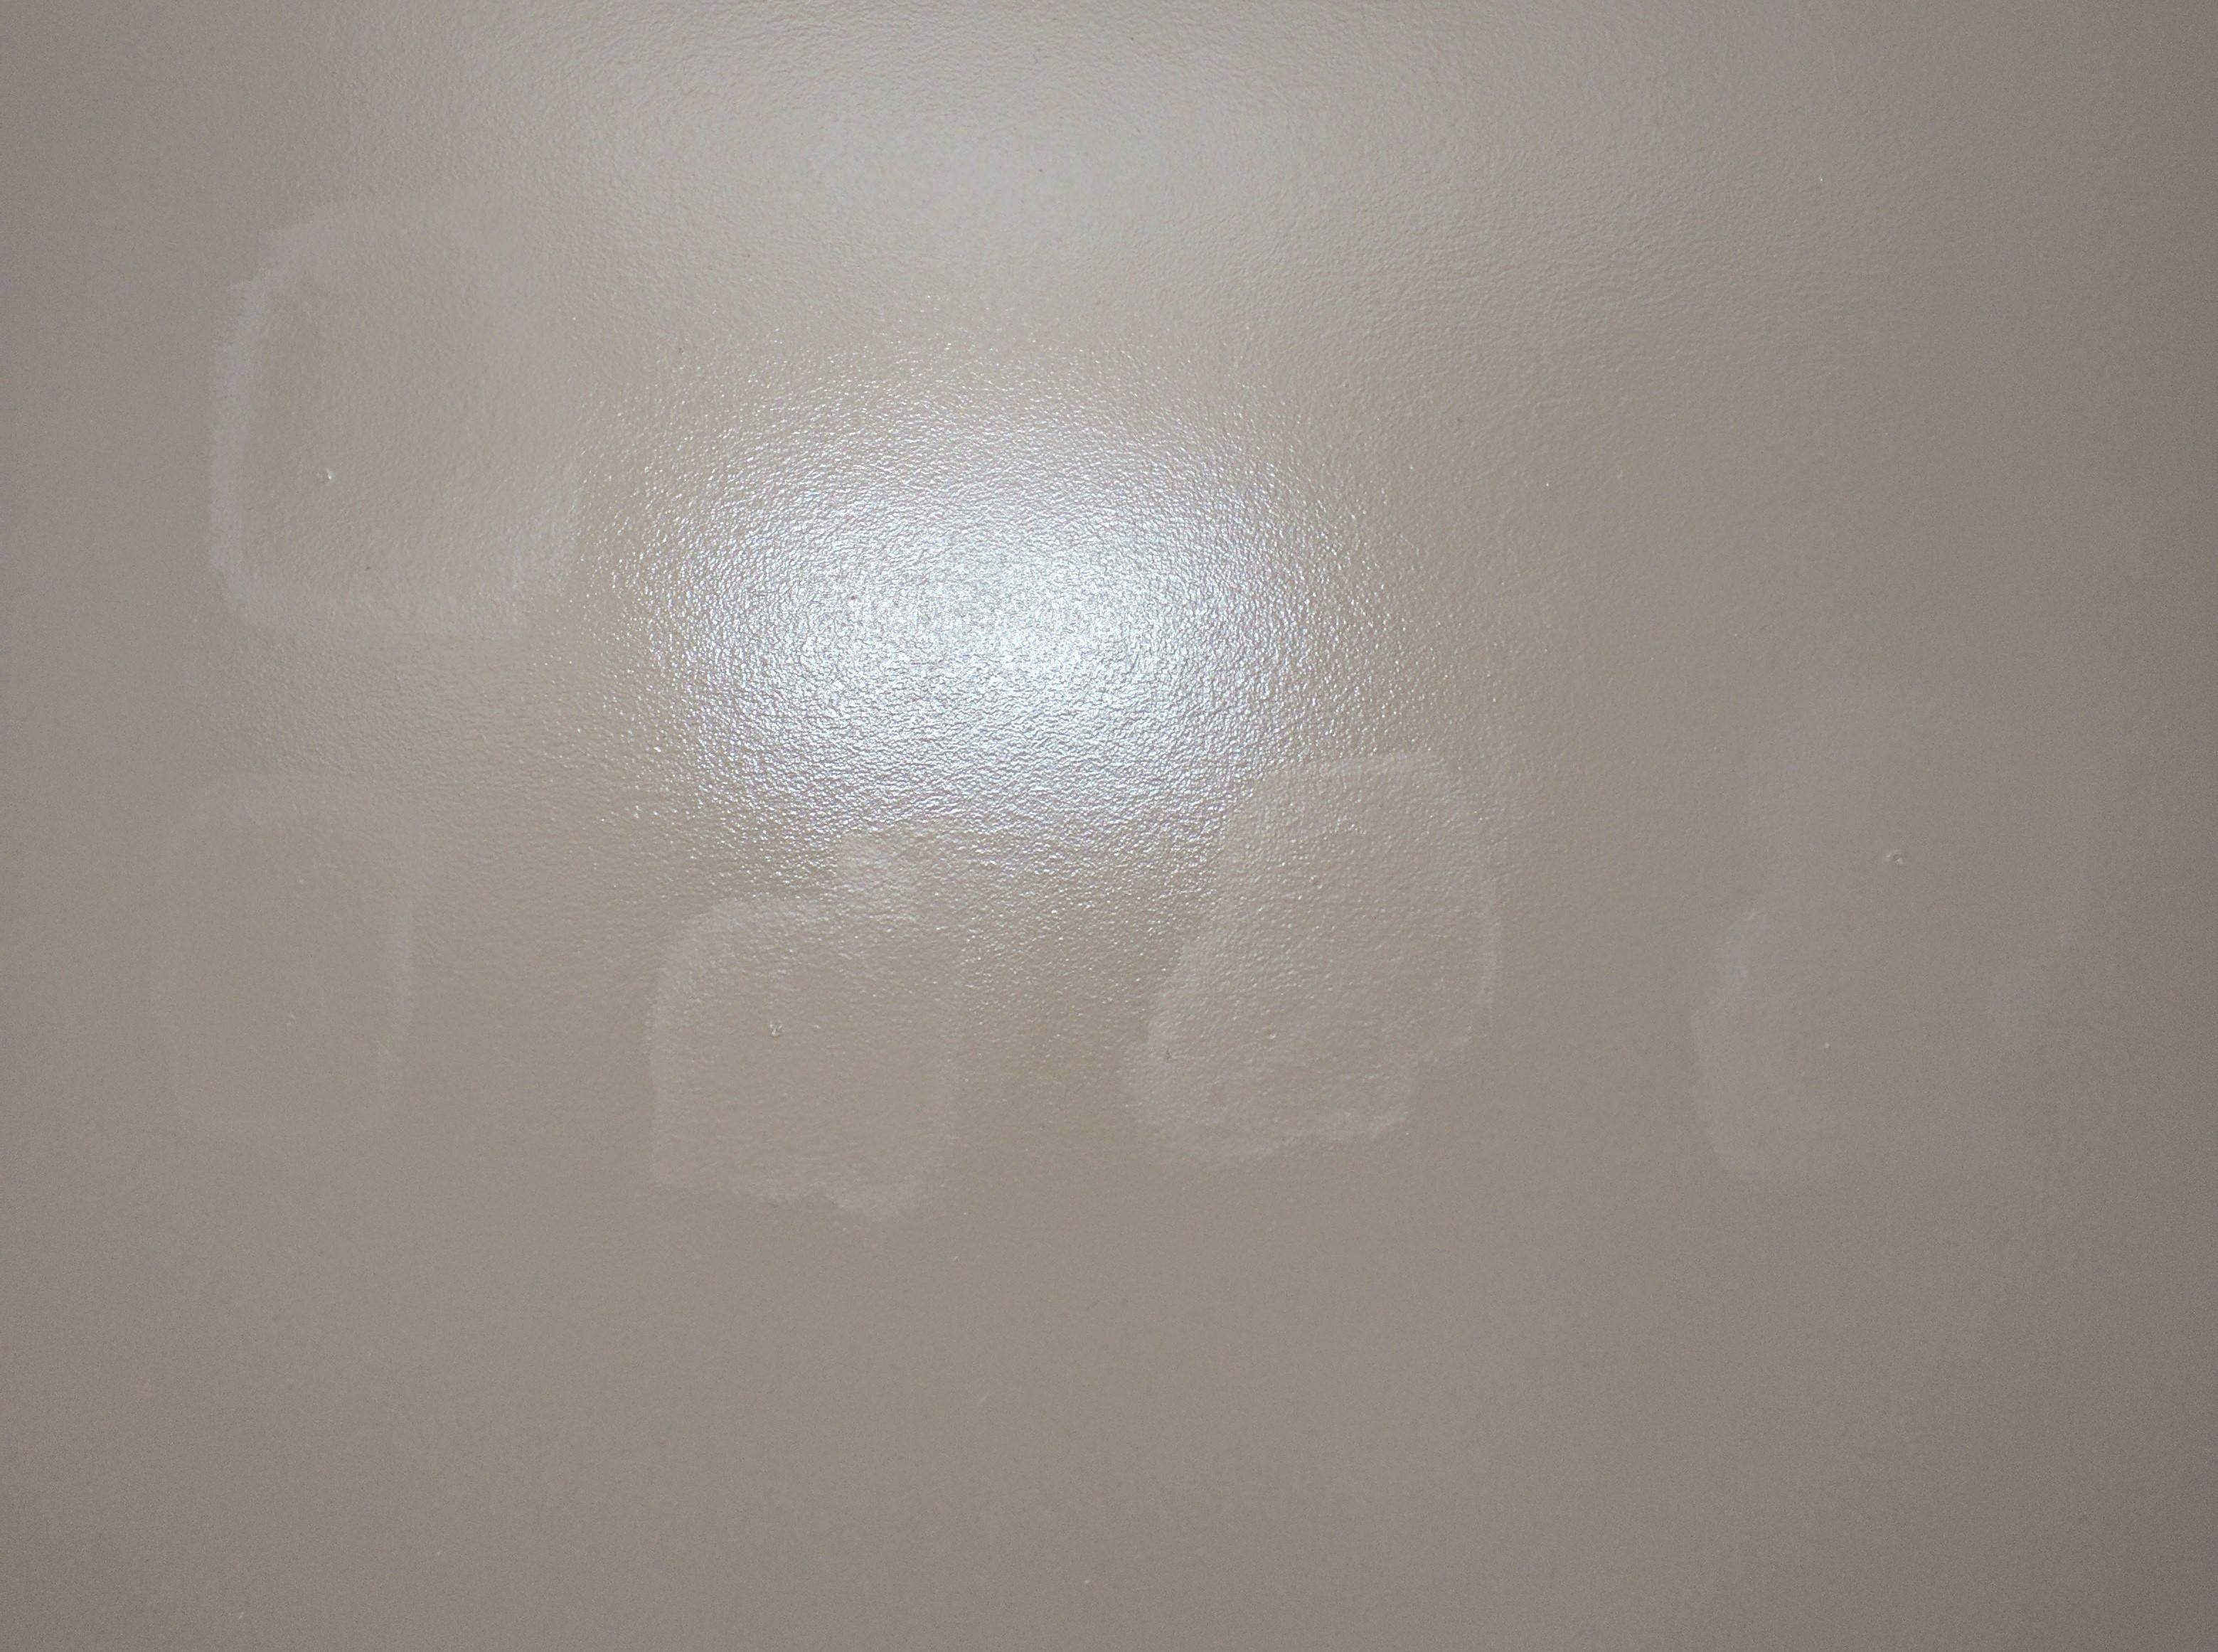 painting - How can I make these semi-gloss paint patches blend with ...